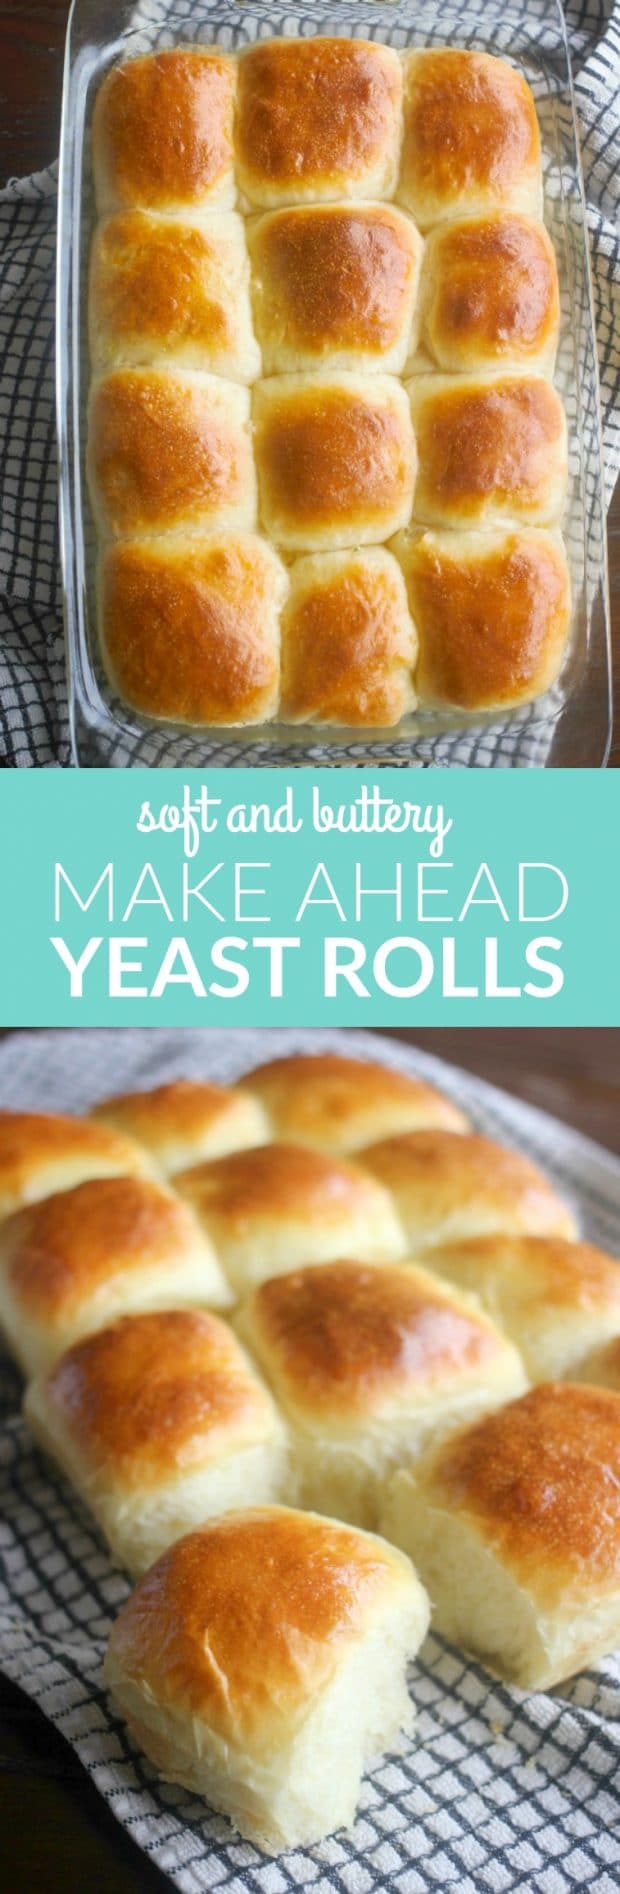 These easy soft yeast rolls can be made ahead and refrigerated until you are ready to bake and serve. They result in tender, fluffy, chewy and buttery rolls!